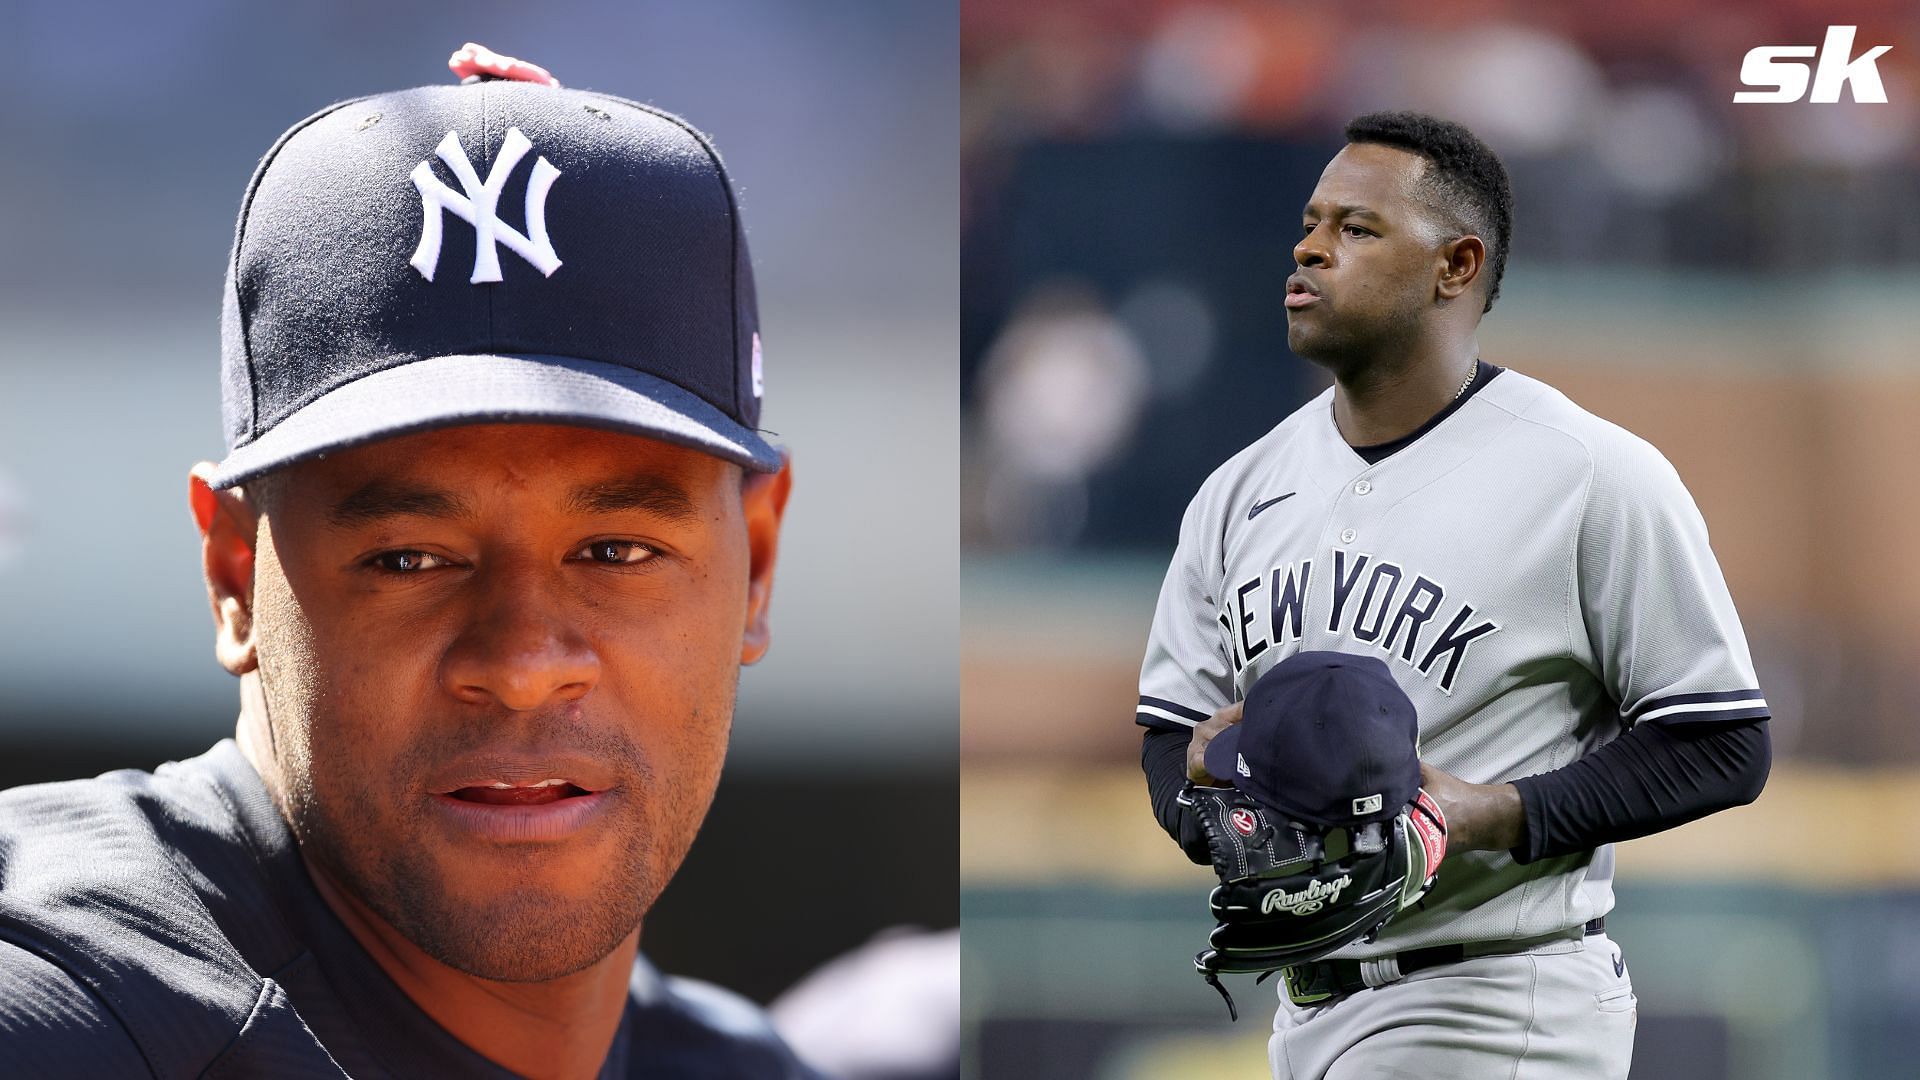 Talkin Yanks] Luis Severino after allowing nine runs in Baltimore “I feel  like I'm the worst pitcher in the game.” : r/baseball